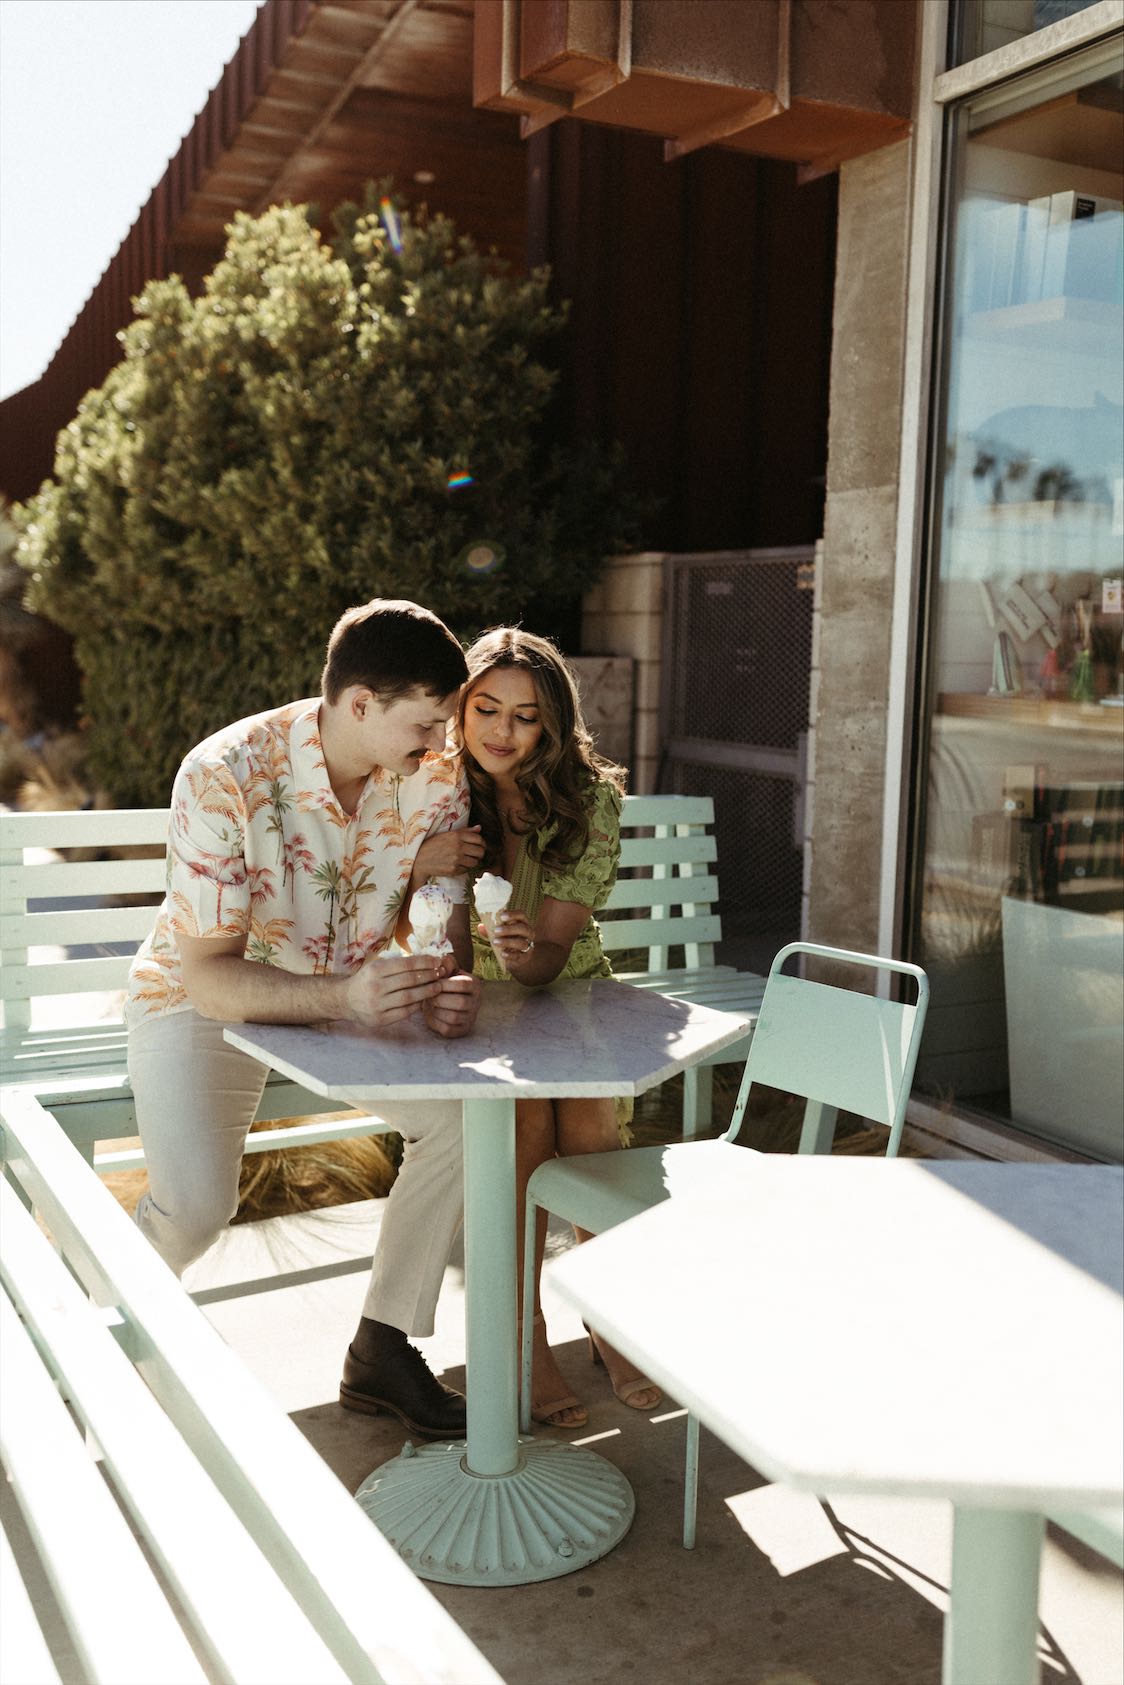 engagement session at an ice cream parlor in Palm Springs California.